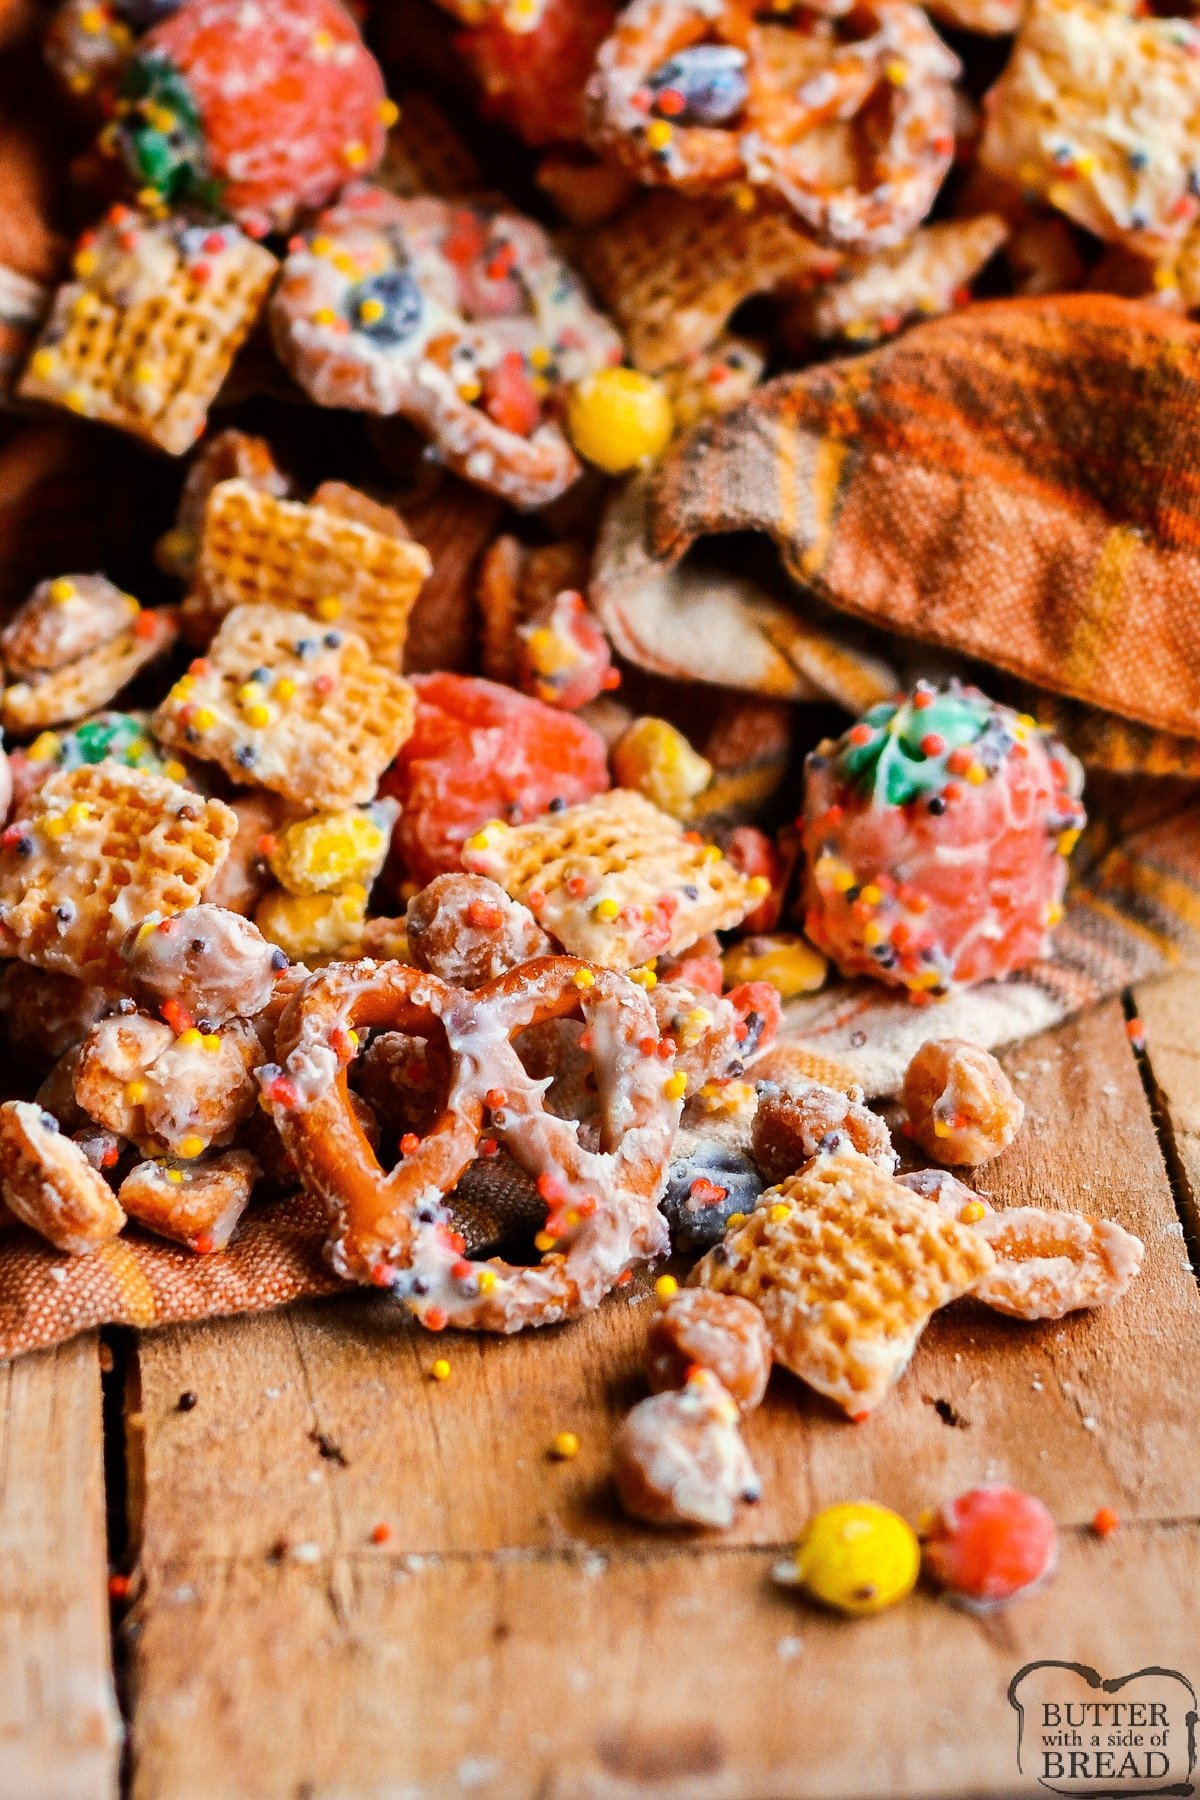 Fall White Chocolate Chex Mix is made with cereal, pretzels, peanuts, and M&Ms all coated in white chocolate. This easy white chocolate chex mix recipe is salty and sweet and comes together in less than 5 minutes!